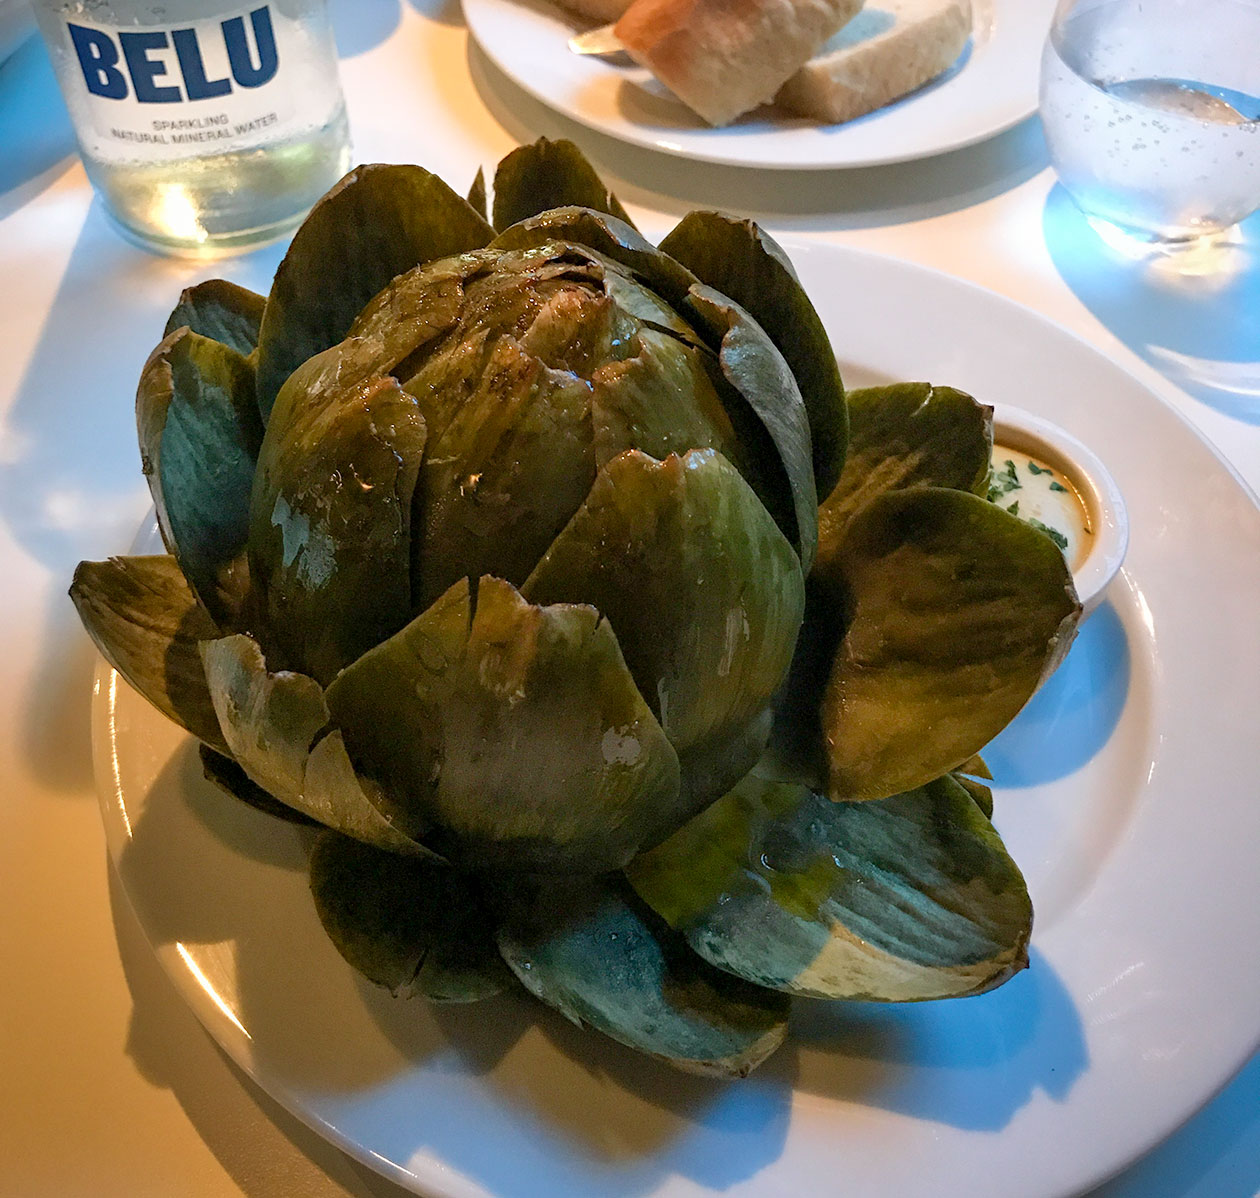 globe artichoke served with vinaigrette at the Hereford Road restaurant Notting Hill Gate in London